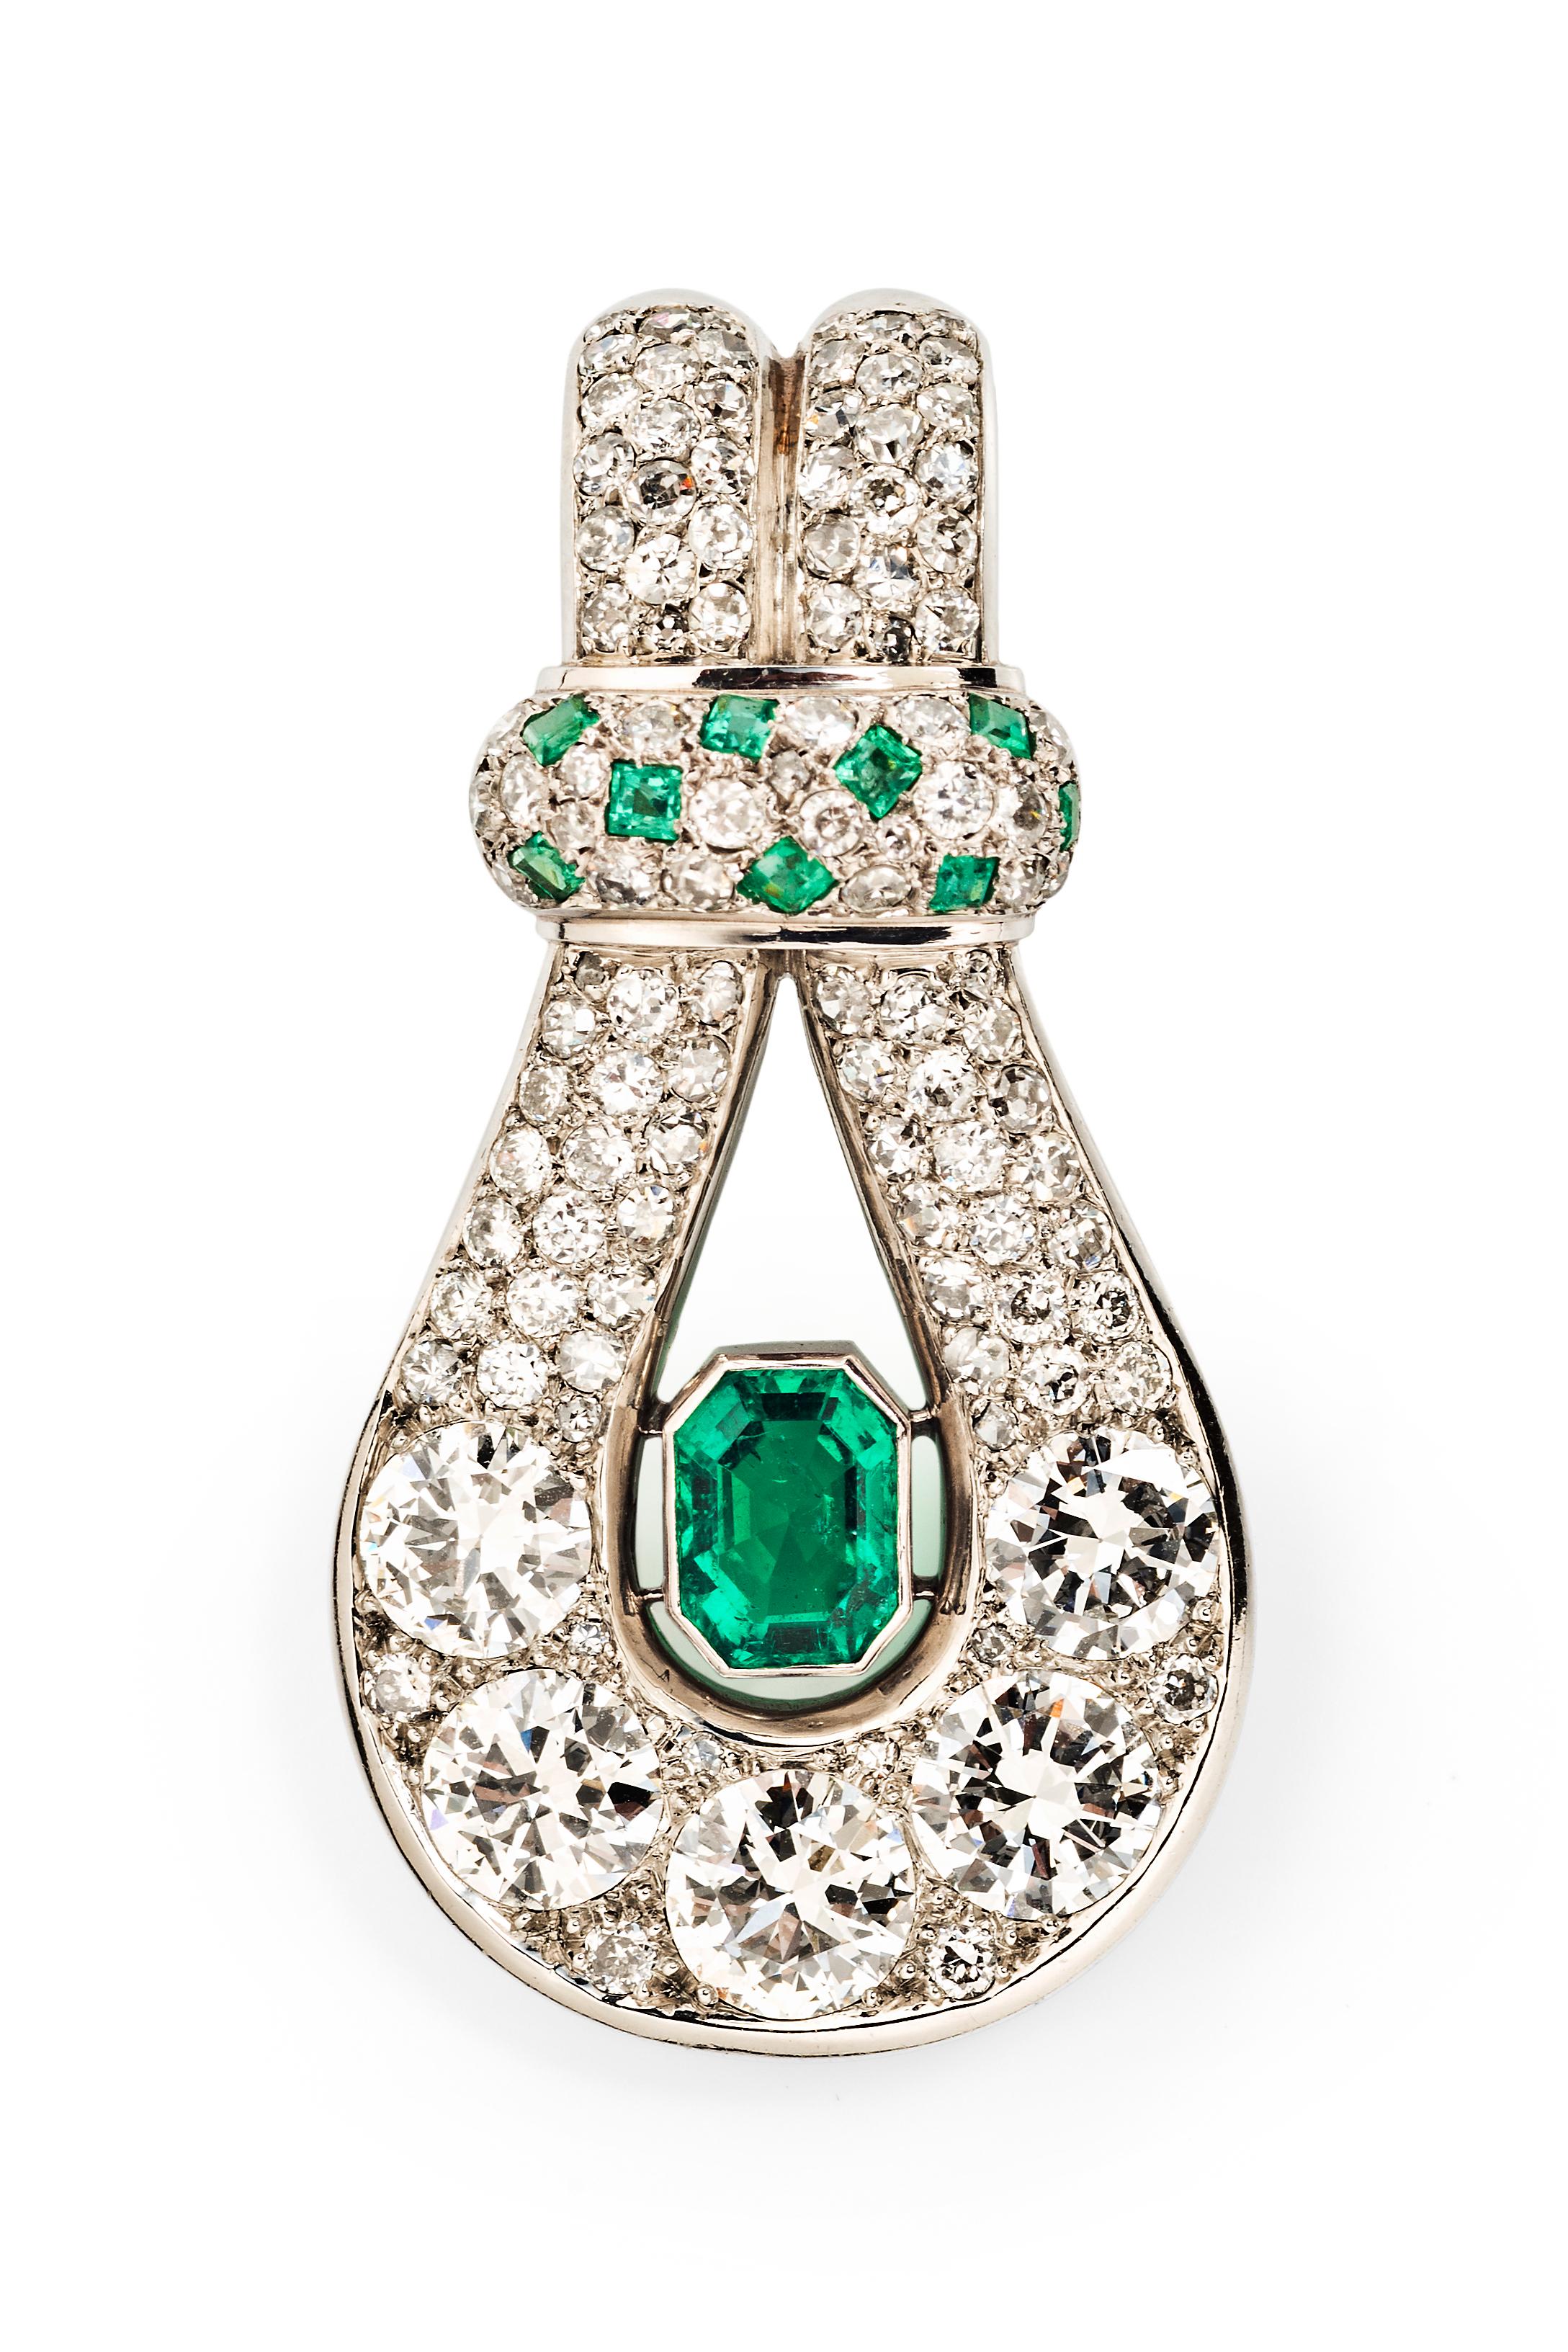 This extraordinary mid-century jewel by Suzanne Belperron consists of a lyre-shaped emerald and diamond detachable pendant brooch suspended from two rows of cultured pearls interspersed with green glass beads and finished with a platinum clasp set